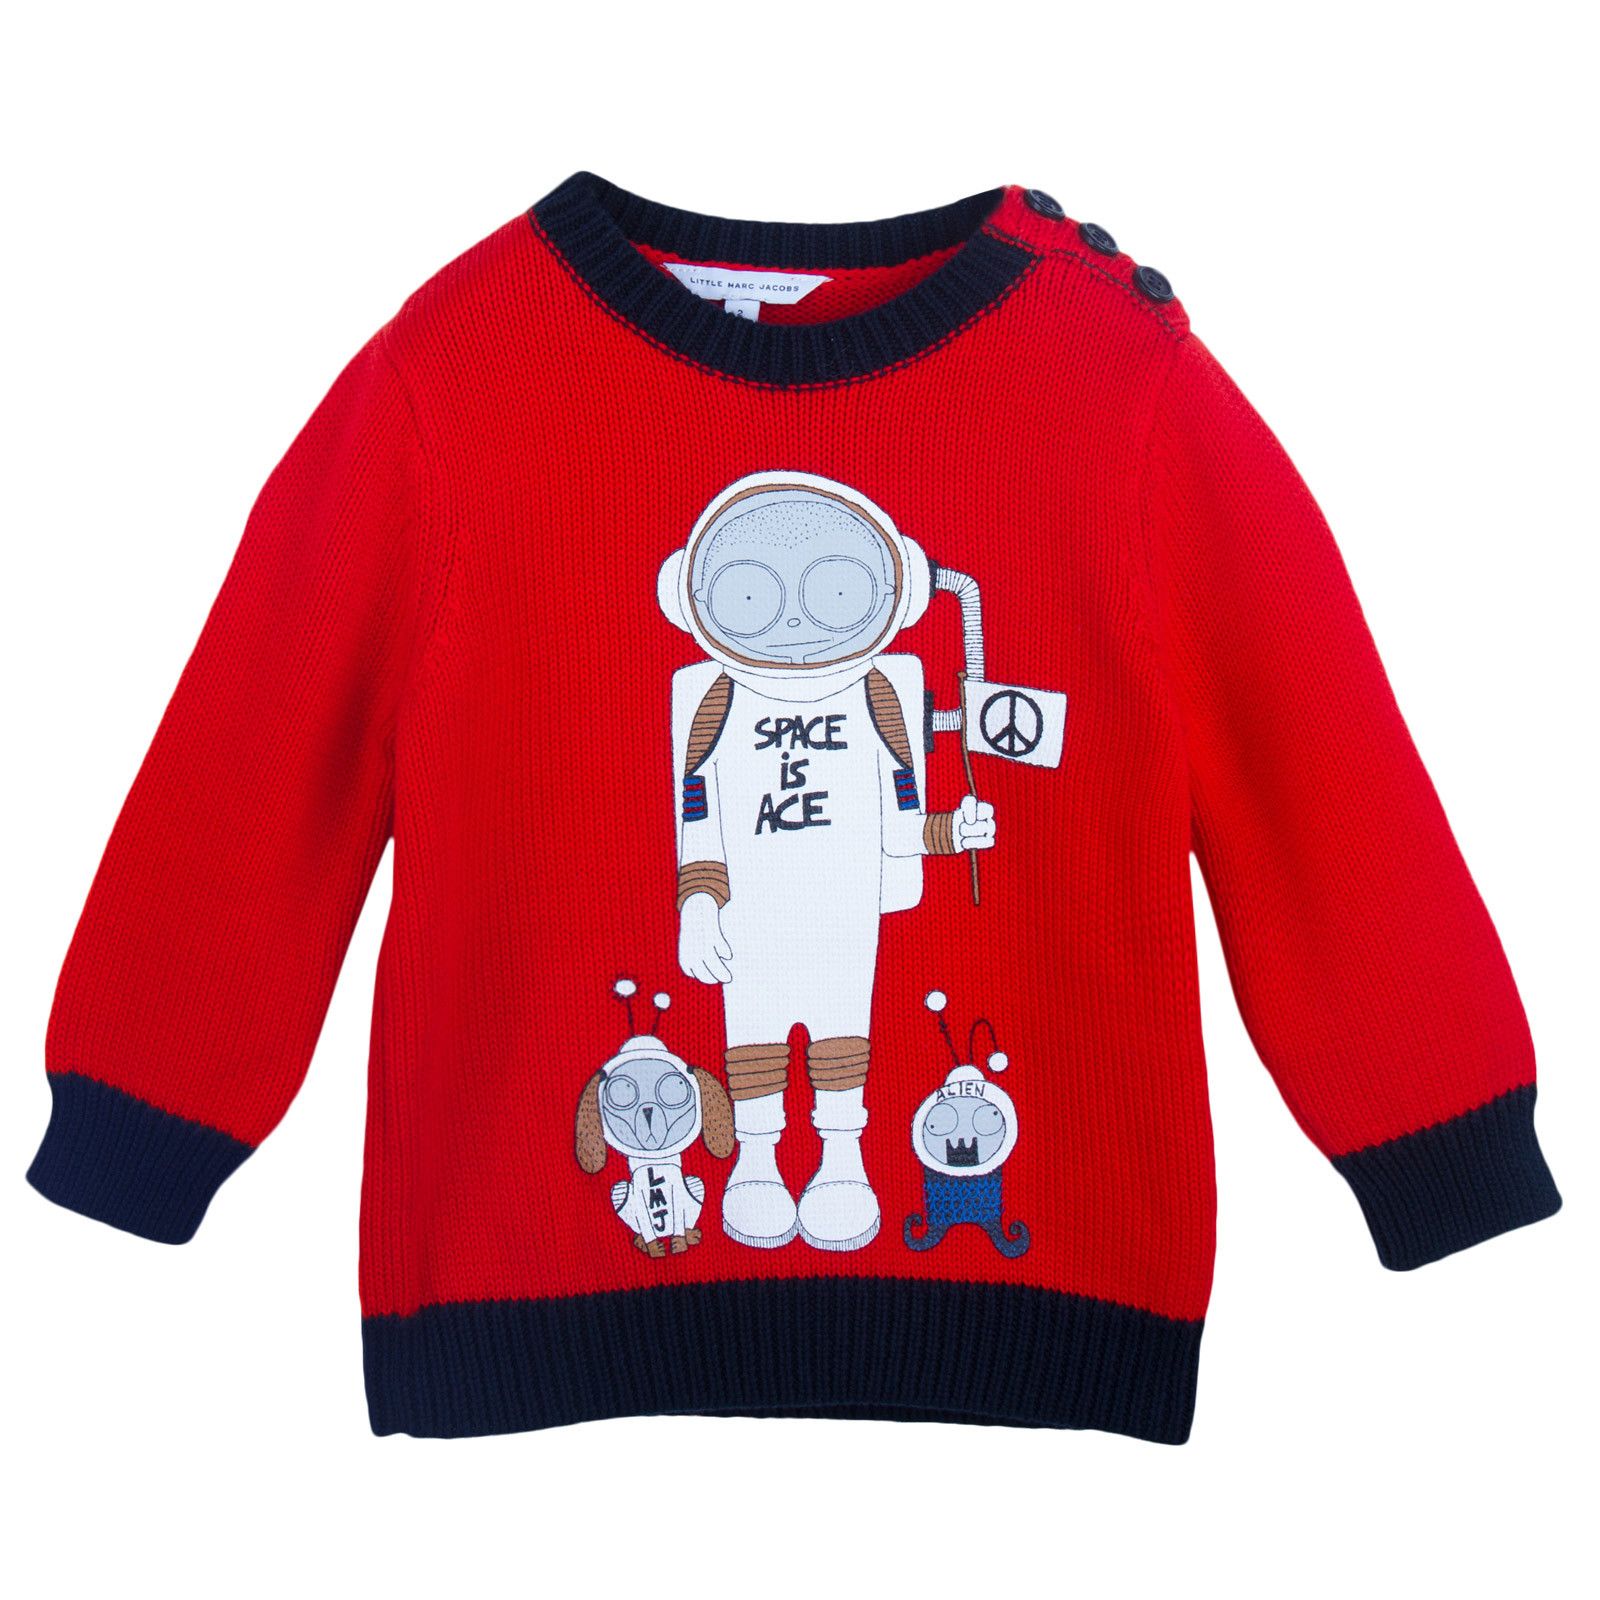 Boys Red 'Mr Marc' Spaceman Knitted Sweater - CÉMAROSE | Children's Fashion Store - 1